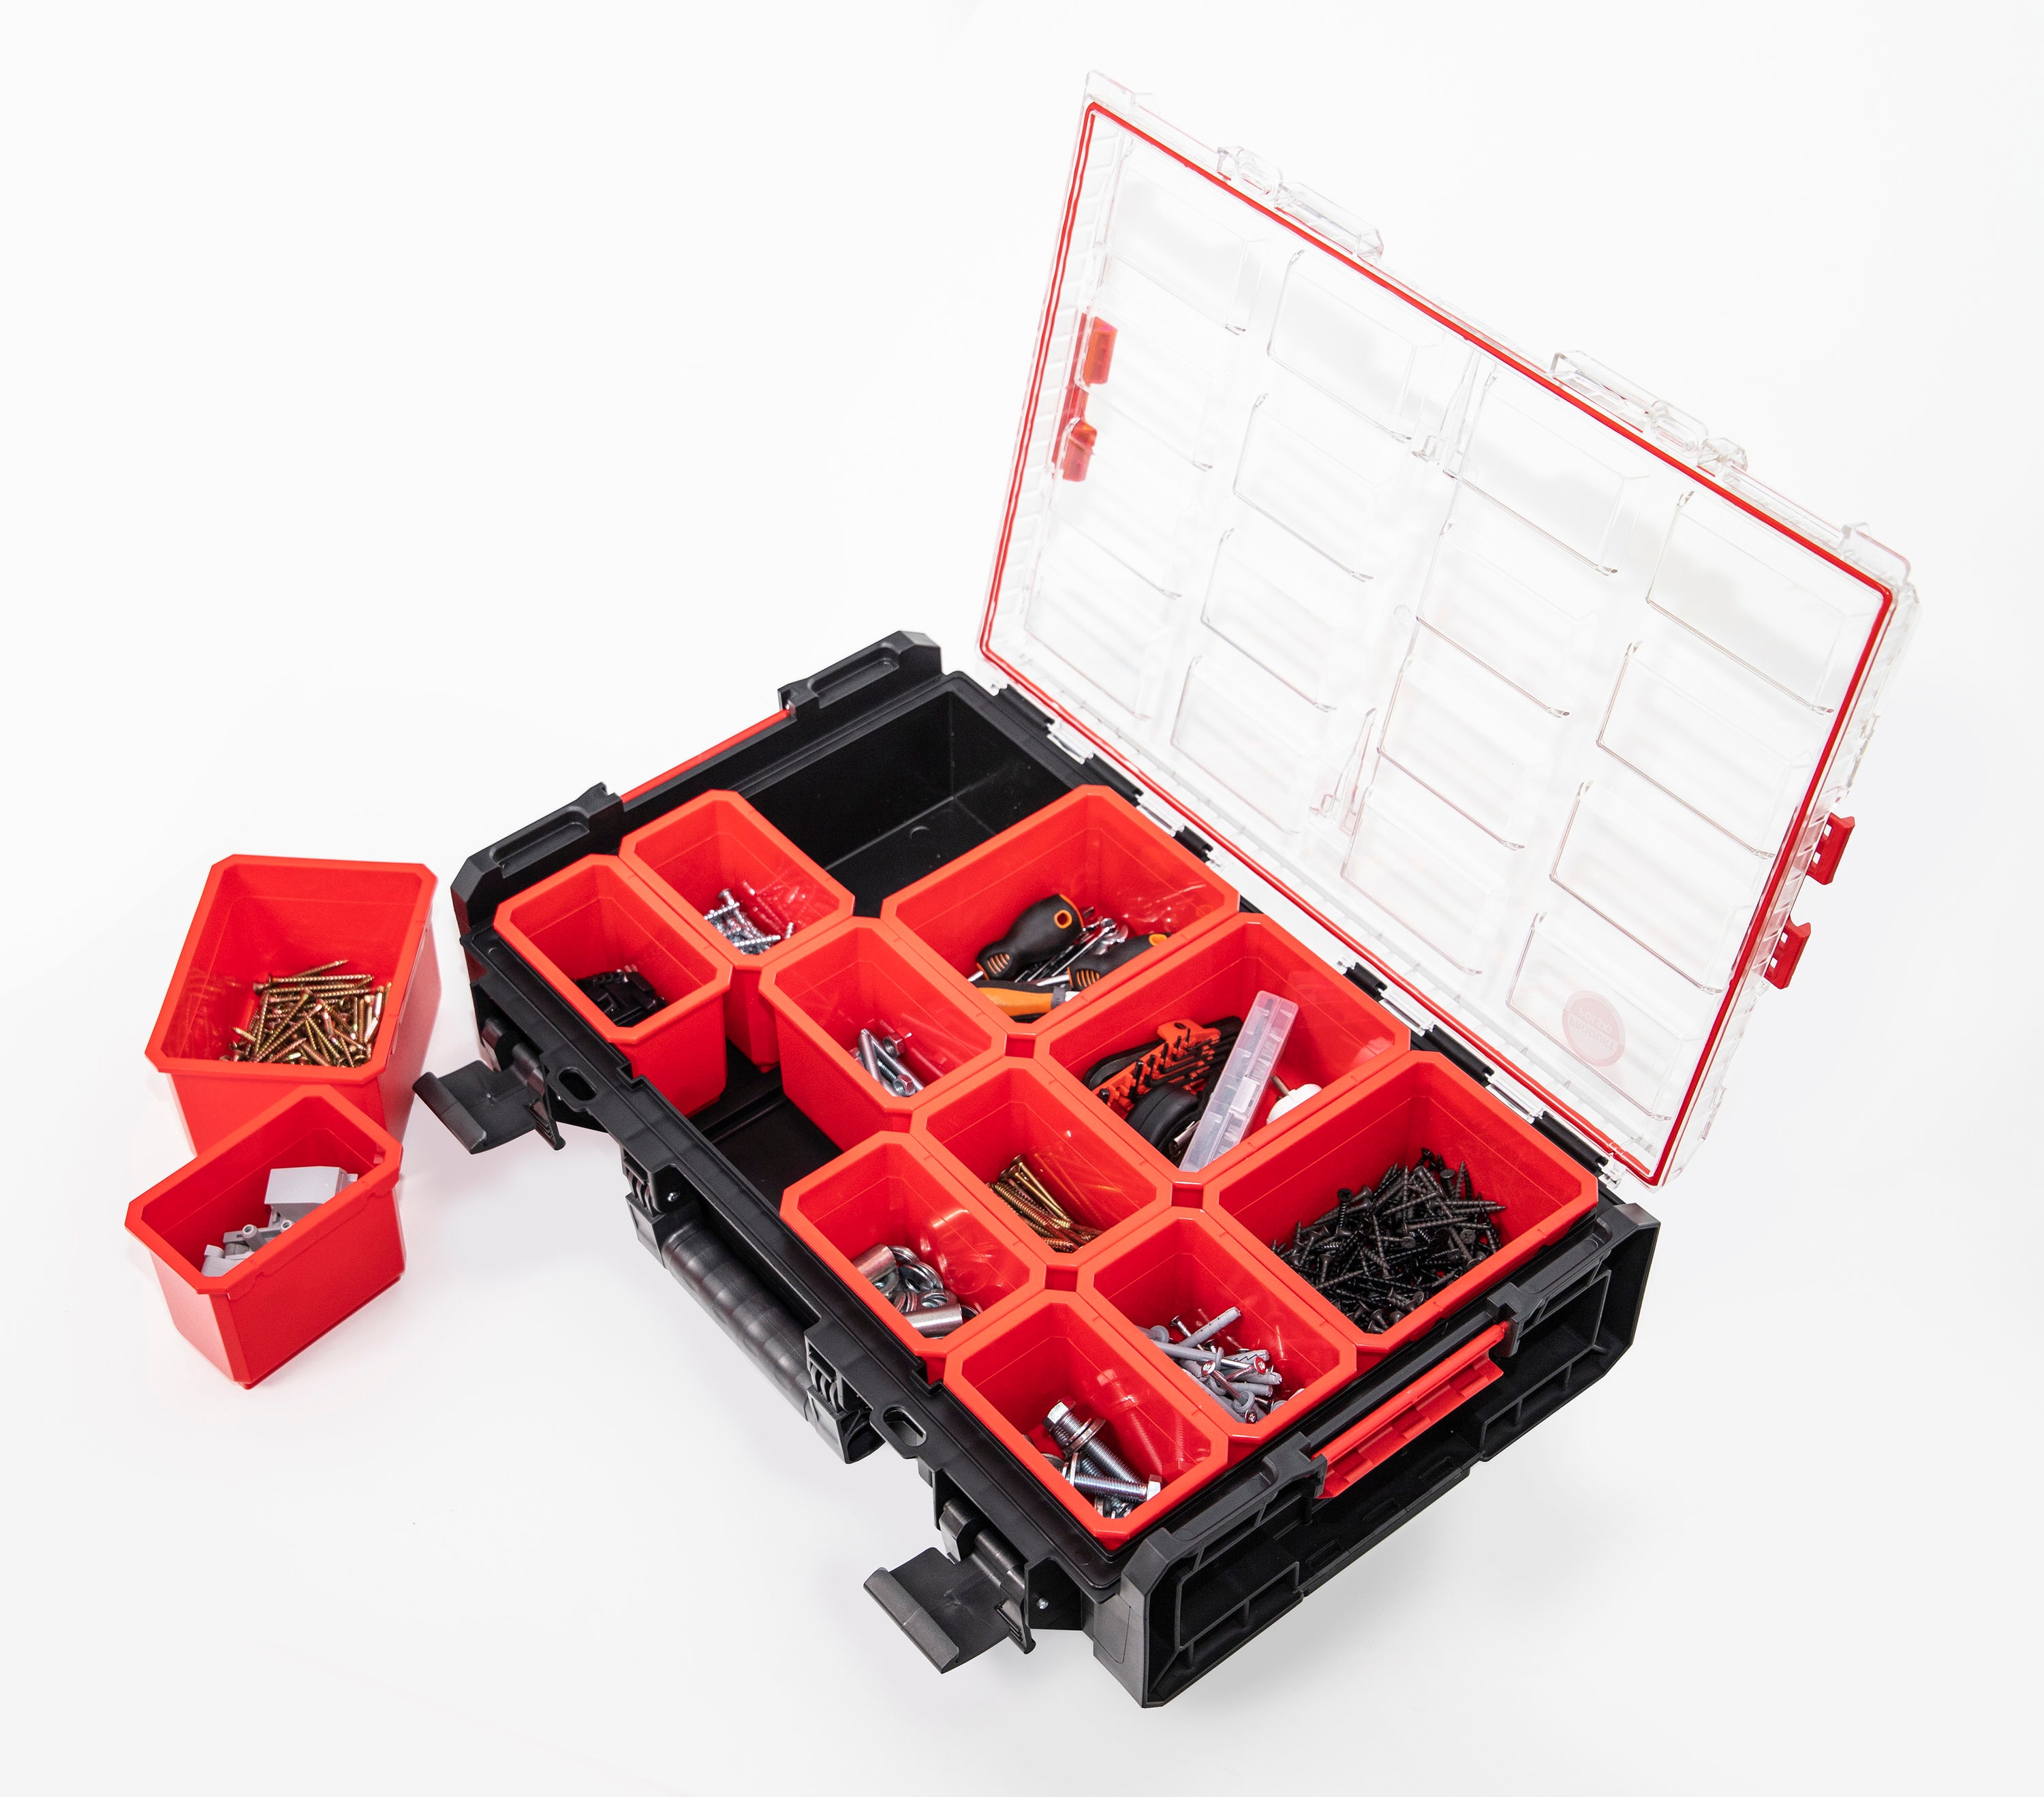 XL ONE Small Organizers QBRICK at Qbrick department Organizer the SYSTEM System Parts in